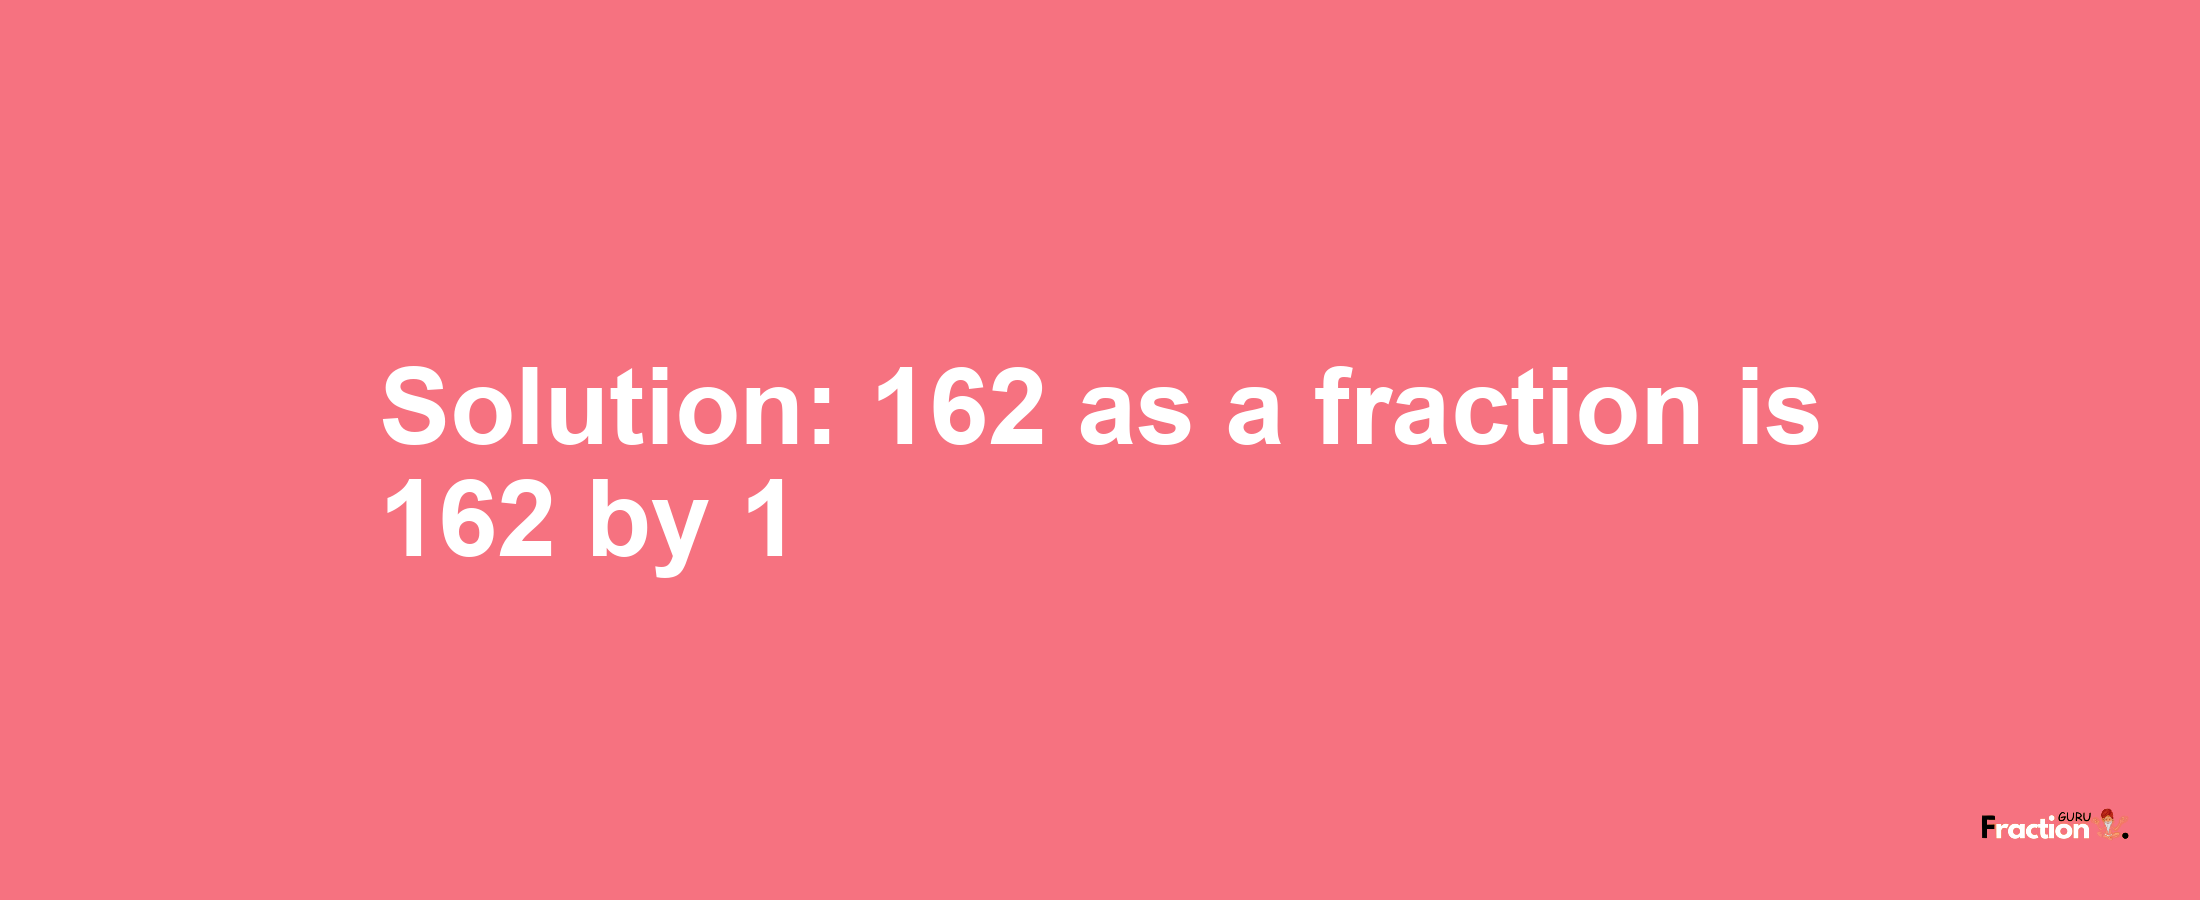 Solution:162 as a fraction is 162/1